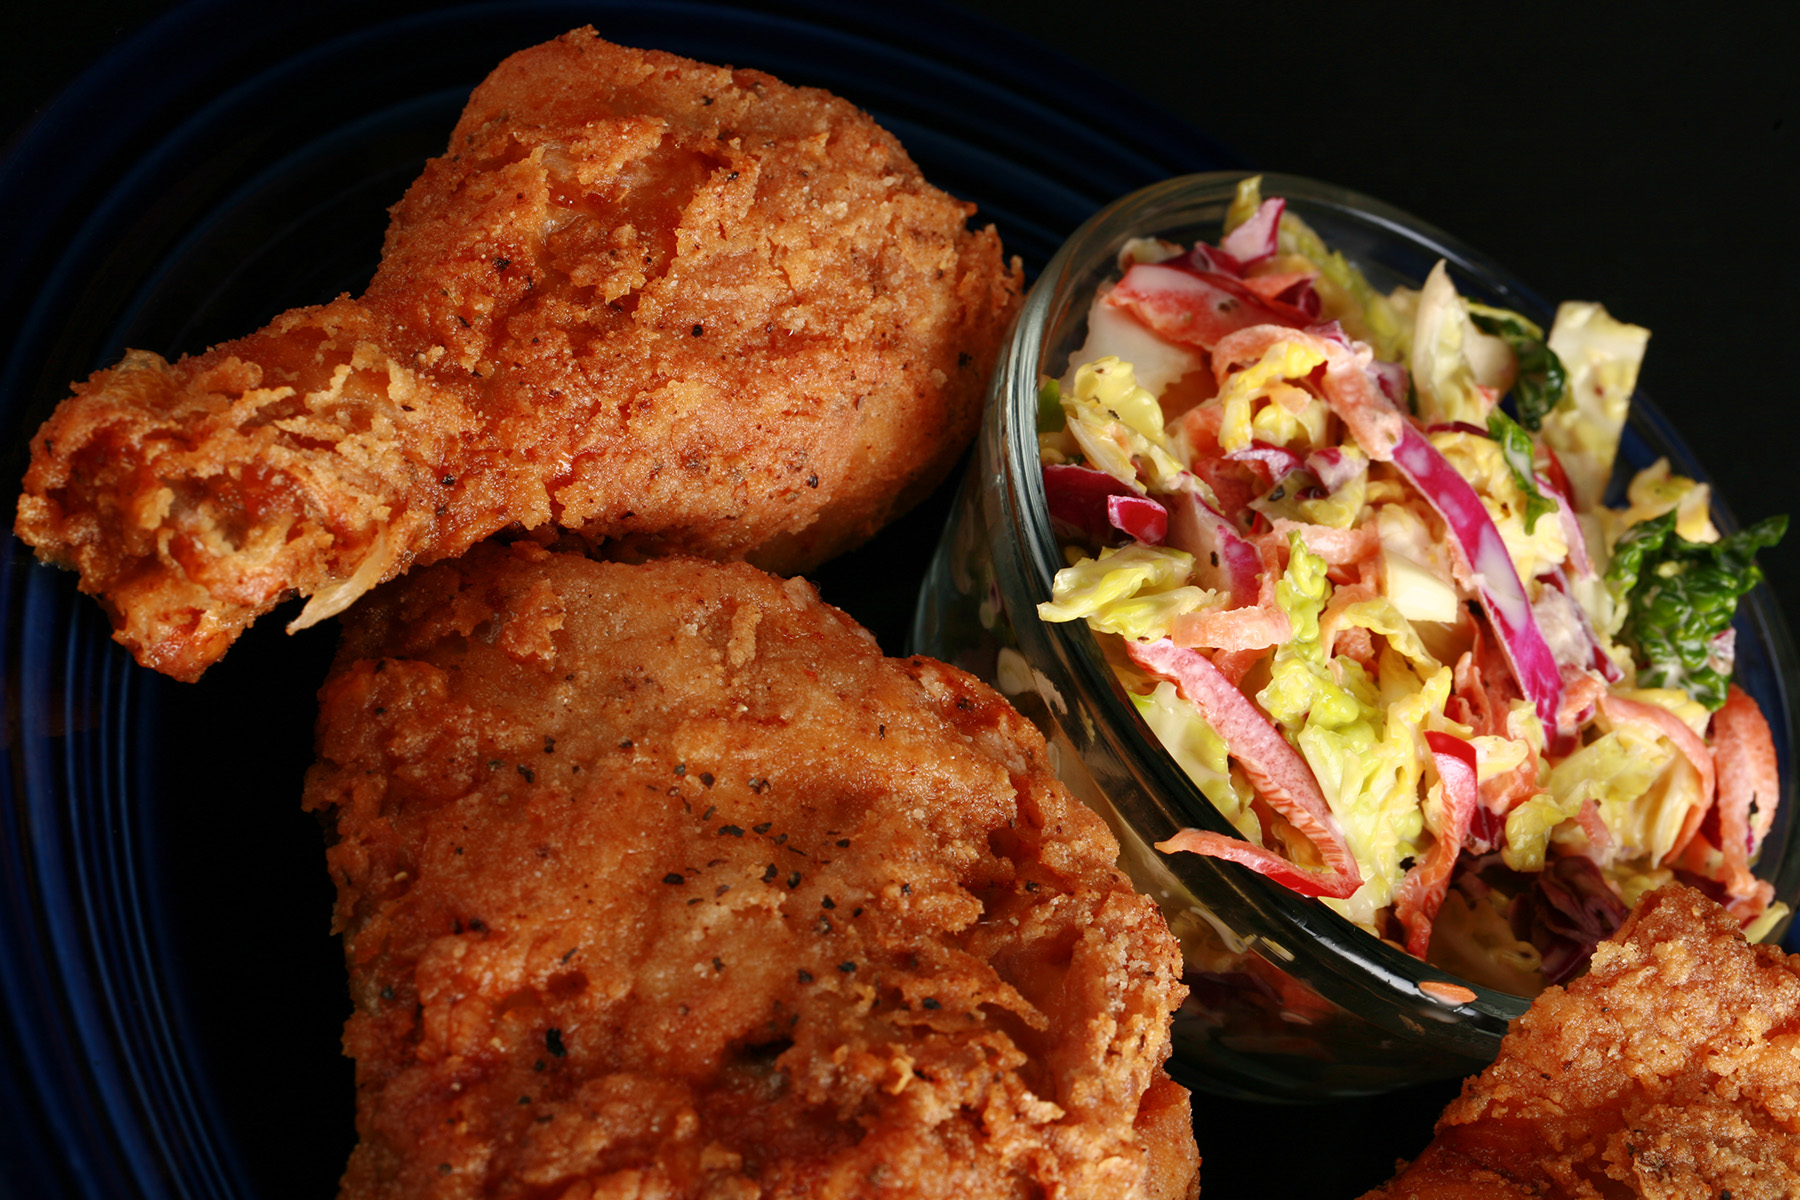 2 pieces of gluten-free fried chicken on a plate, next to a small bowl of colourful coleslaw.